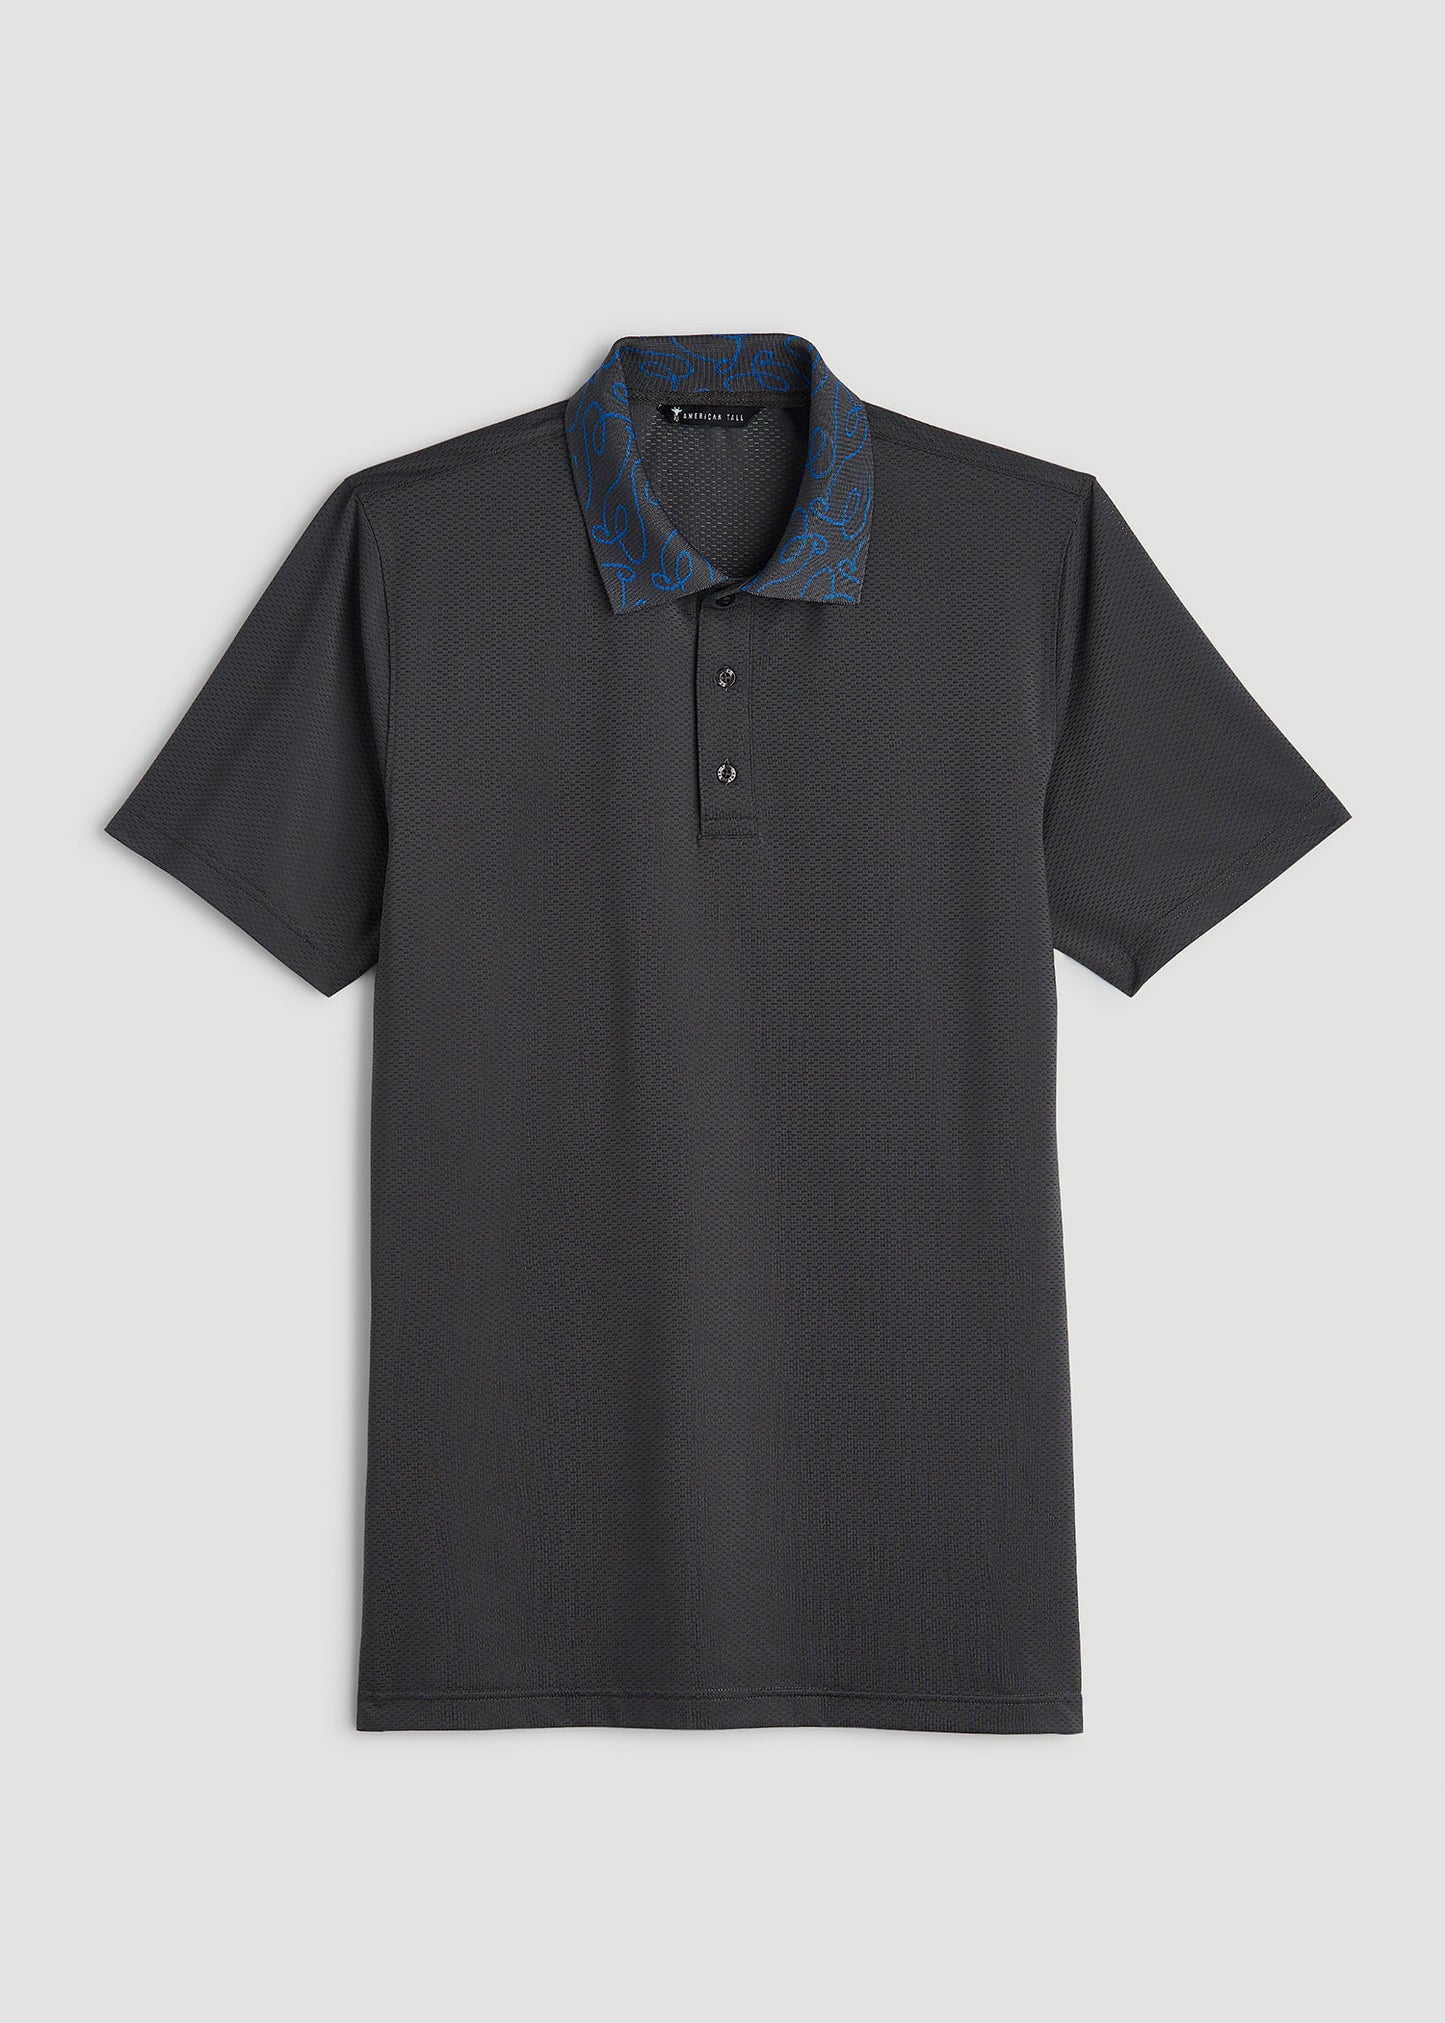 Jacquard Knit Collar Golf Polo Shirt for Tall Men in Steel Grey